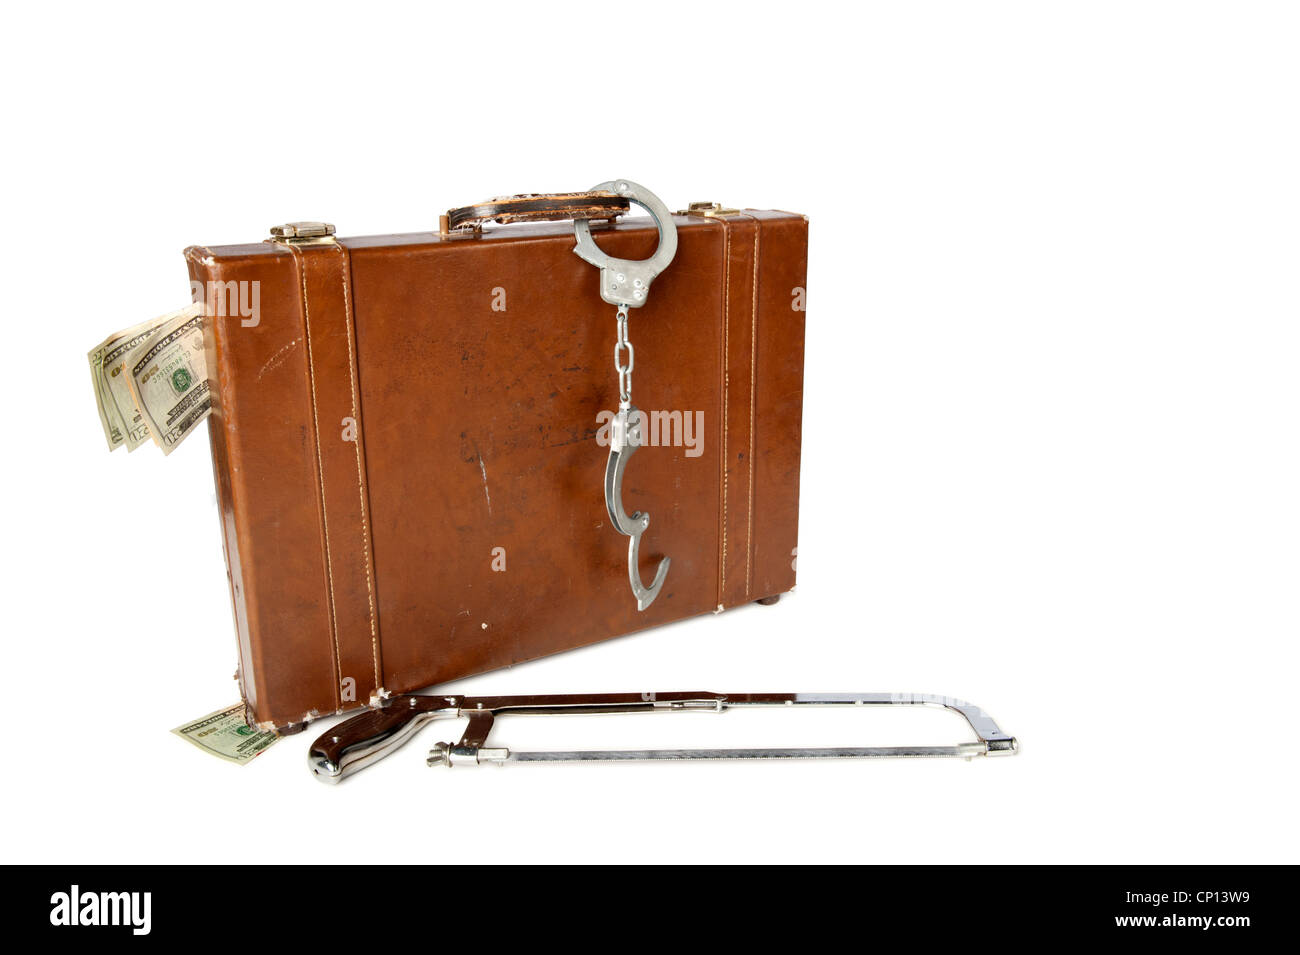 A hacksaw lies beside a leather briefcase with handcuffs on the handle and cash sticking out of it Stock Photo